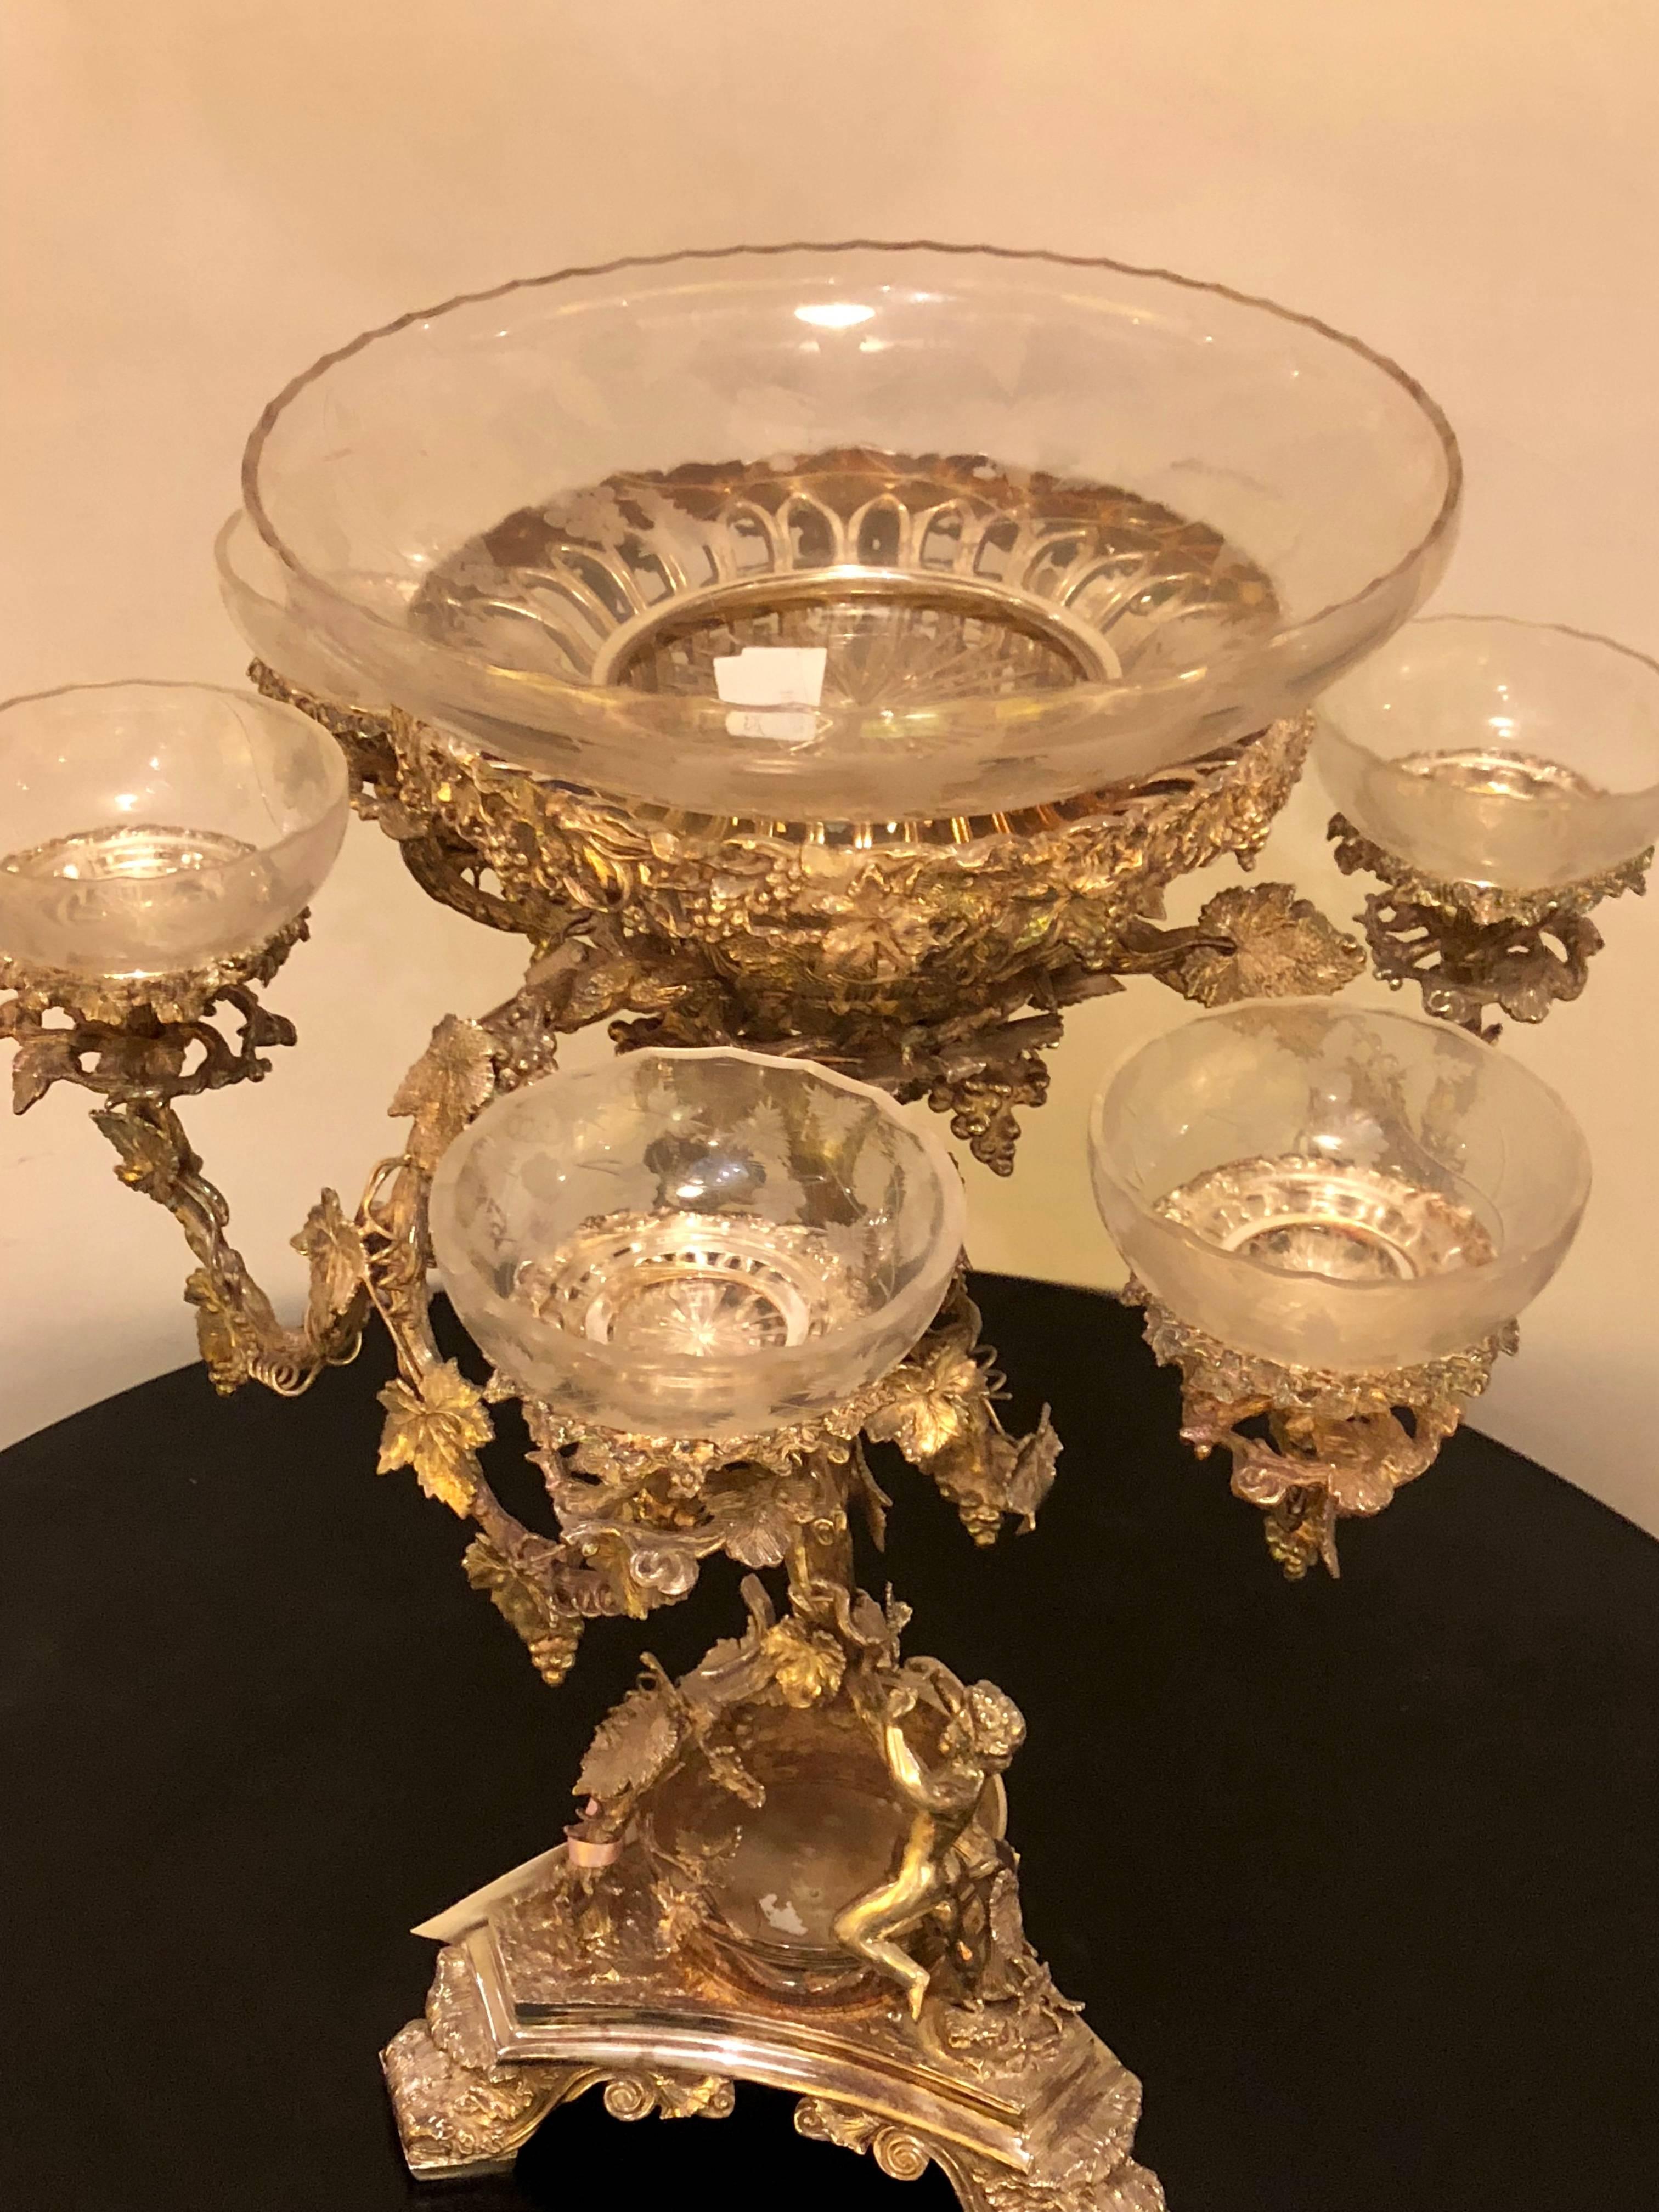 A silver plated finely cast centrepiece epergne with glass inserts. Of recent manufacture. Sure to add style and grace to any dining setting.